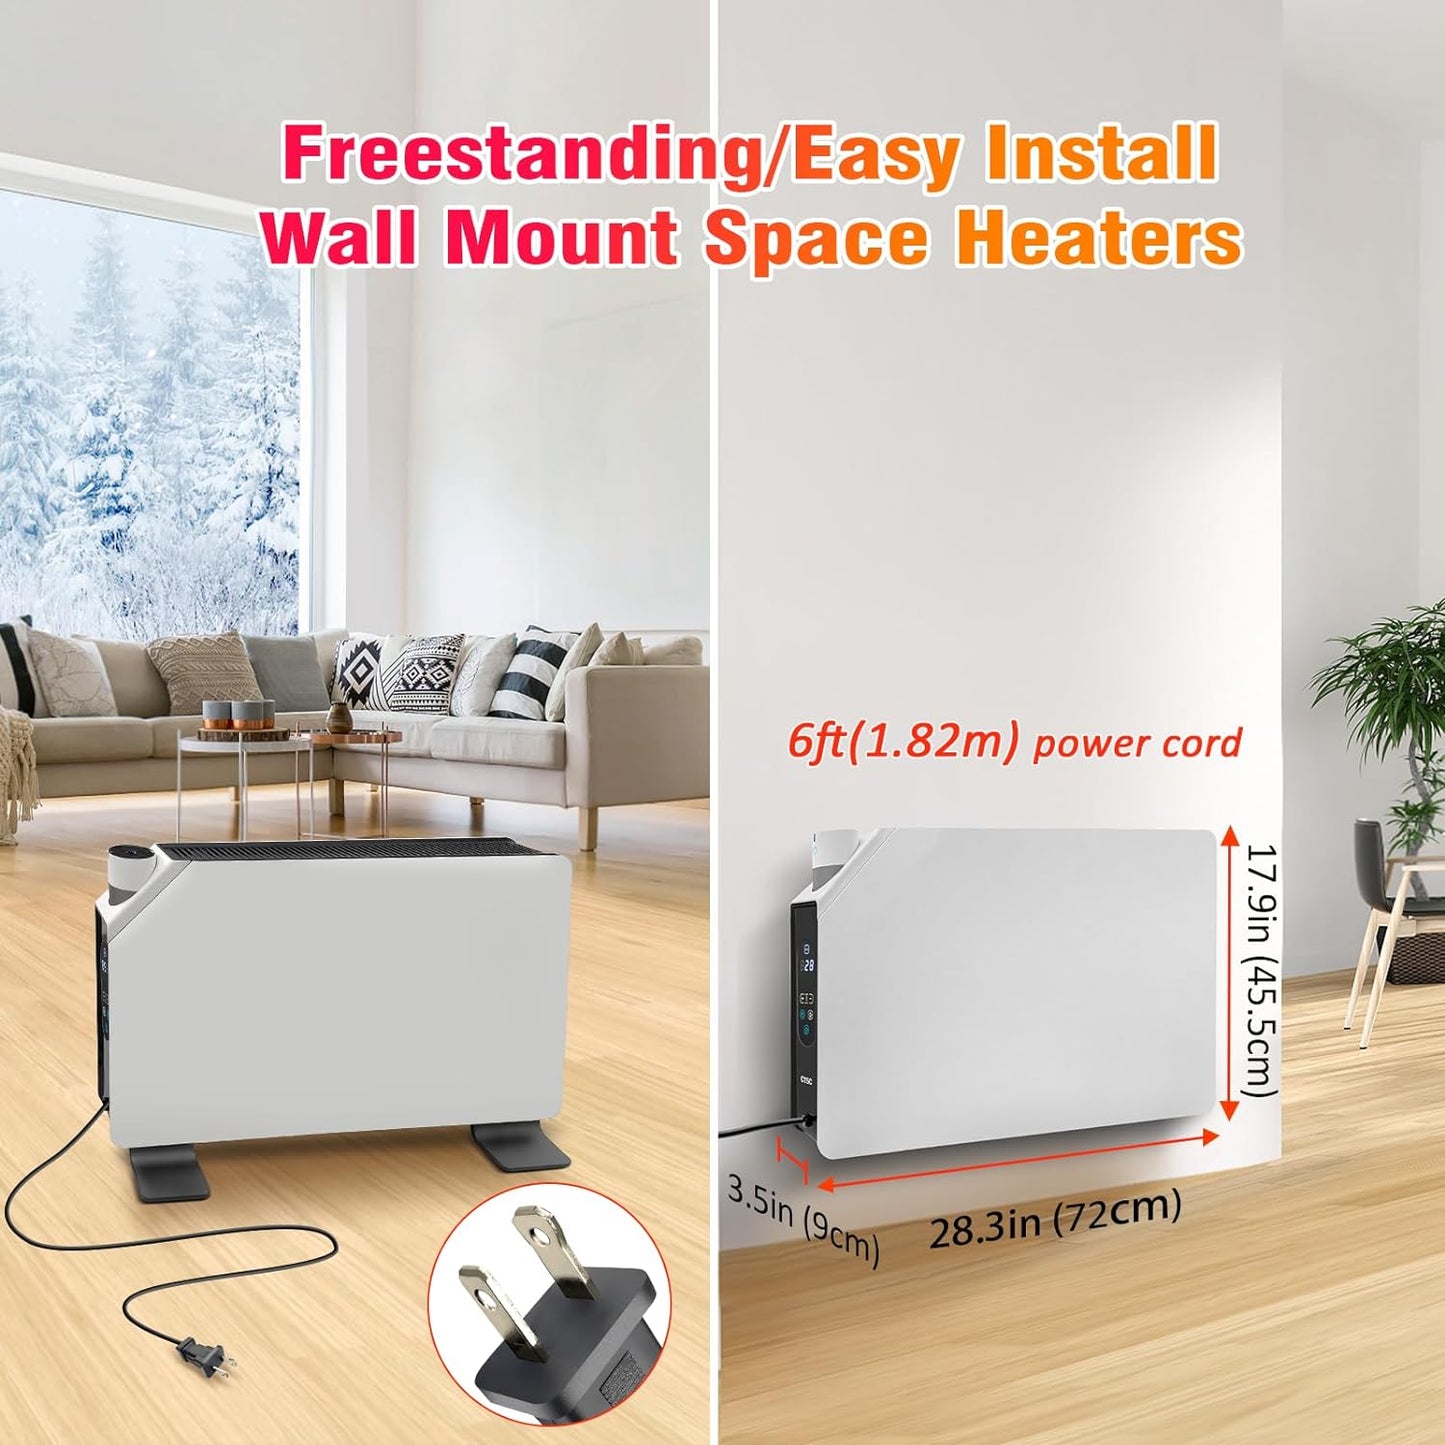 CTSC Convection Heater - Panel Heater - Space Heater Indoor Large Room - 750W/1500W Convection Panel Heater with Remote Control, Adjustable Thermostat, Freestanding/Wall Mount